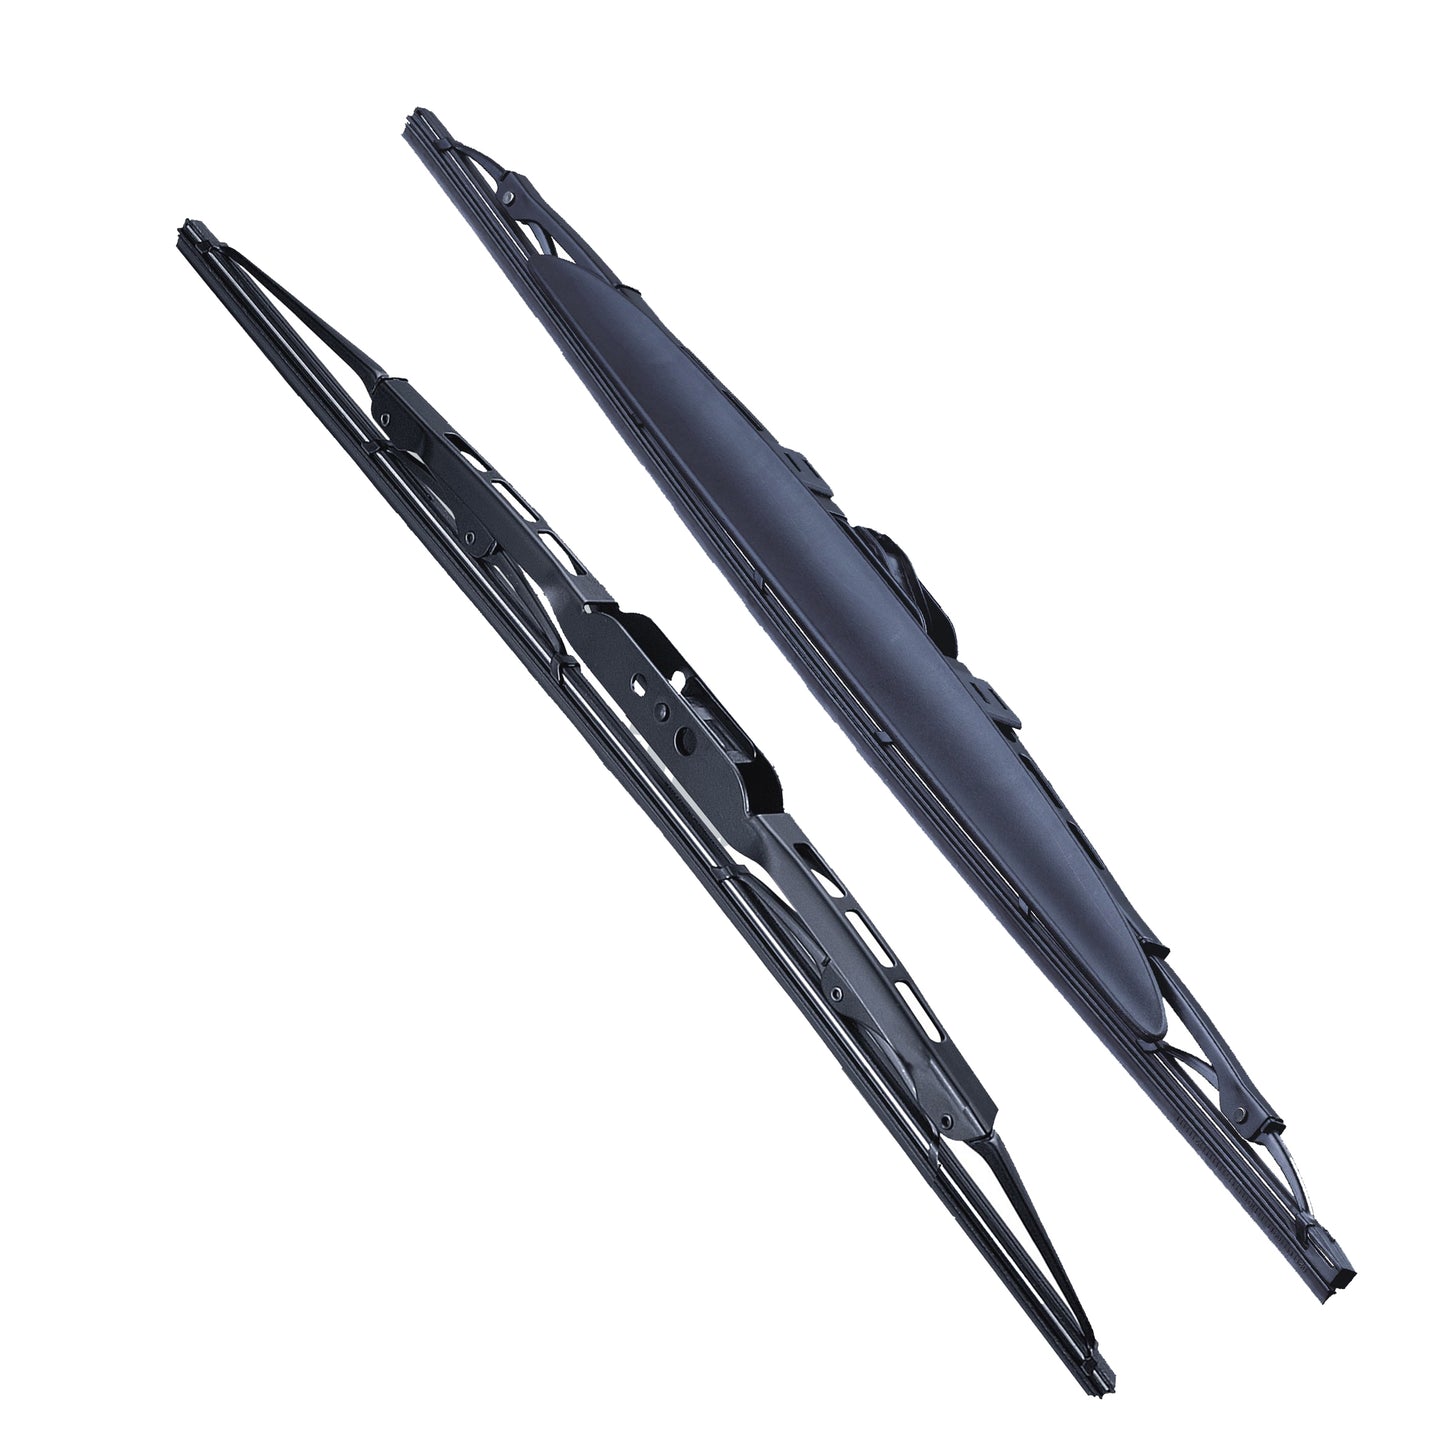 VW SCIROCCO Coupe Aug 1980 to Jul 1992 Wiper Blade Kit